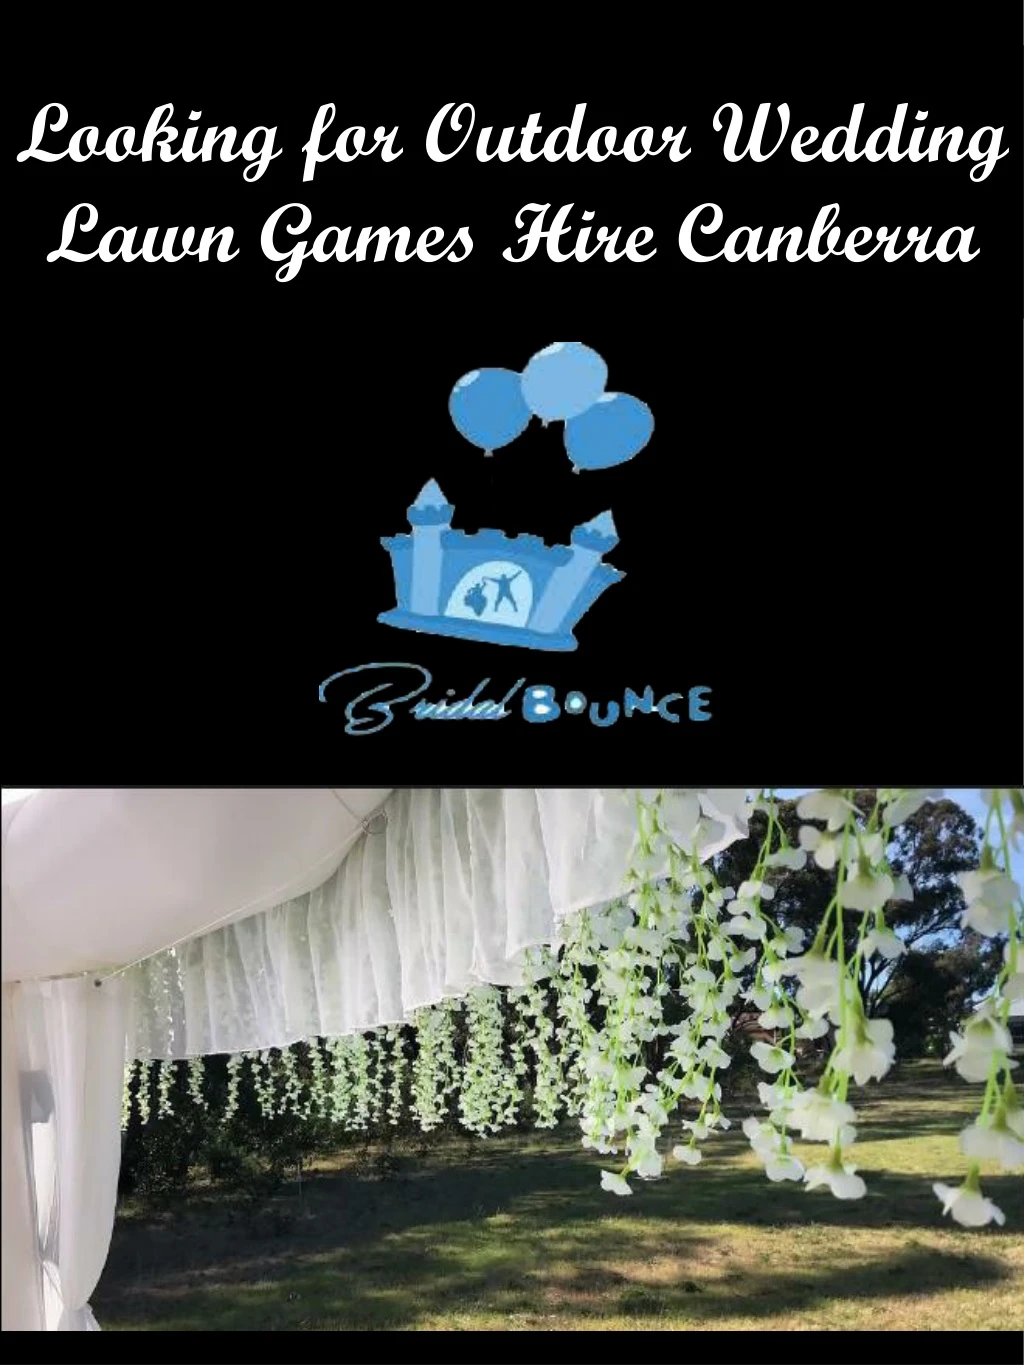 looking for outdoor wedding lawn games hire canberra